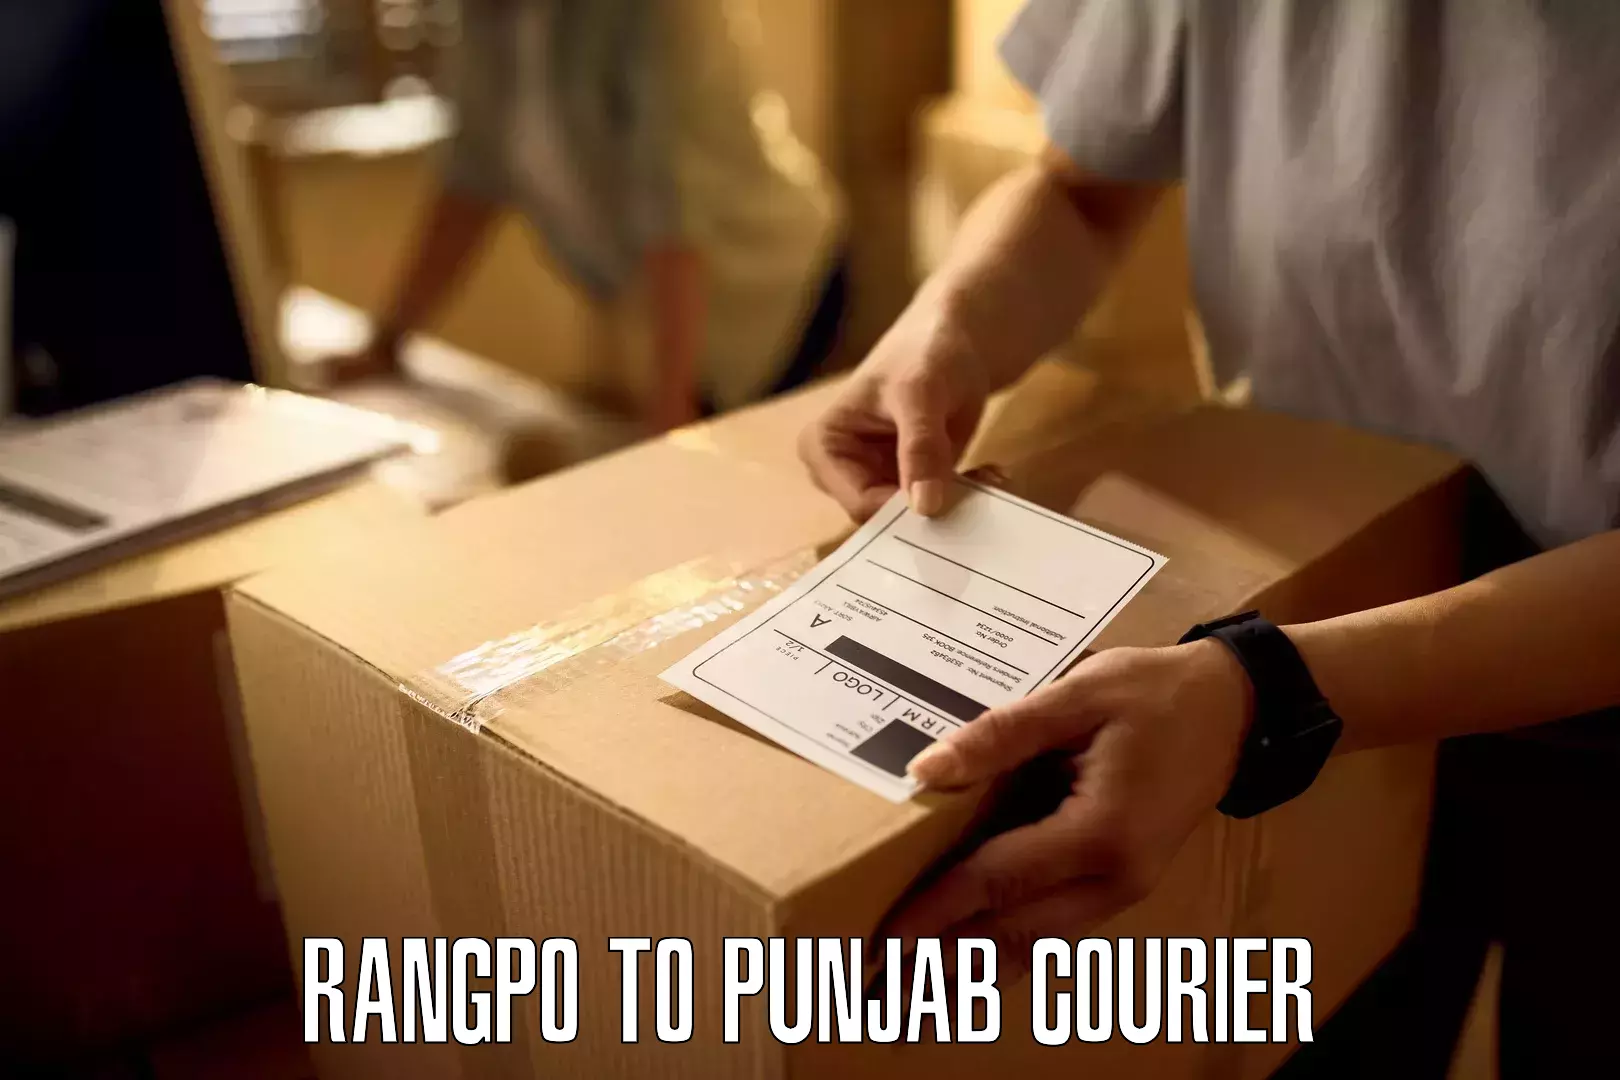 Next-day delivery options Rangpo to Jalandhar